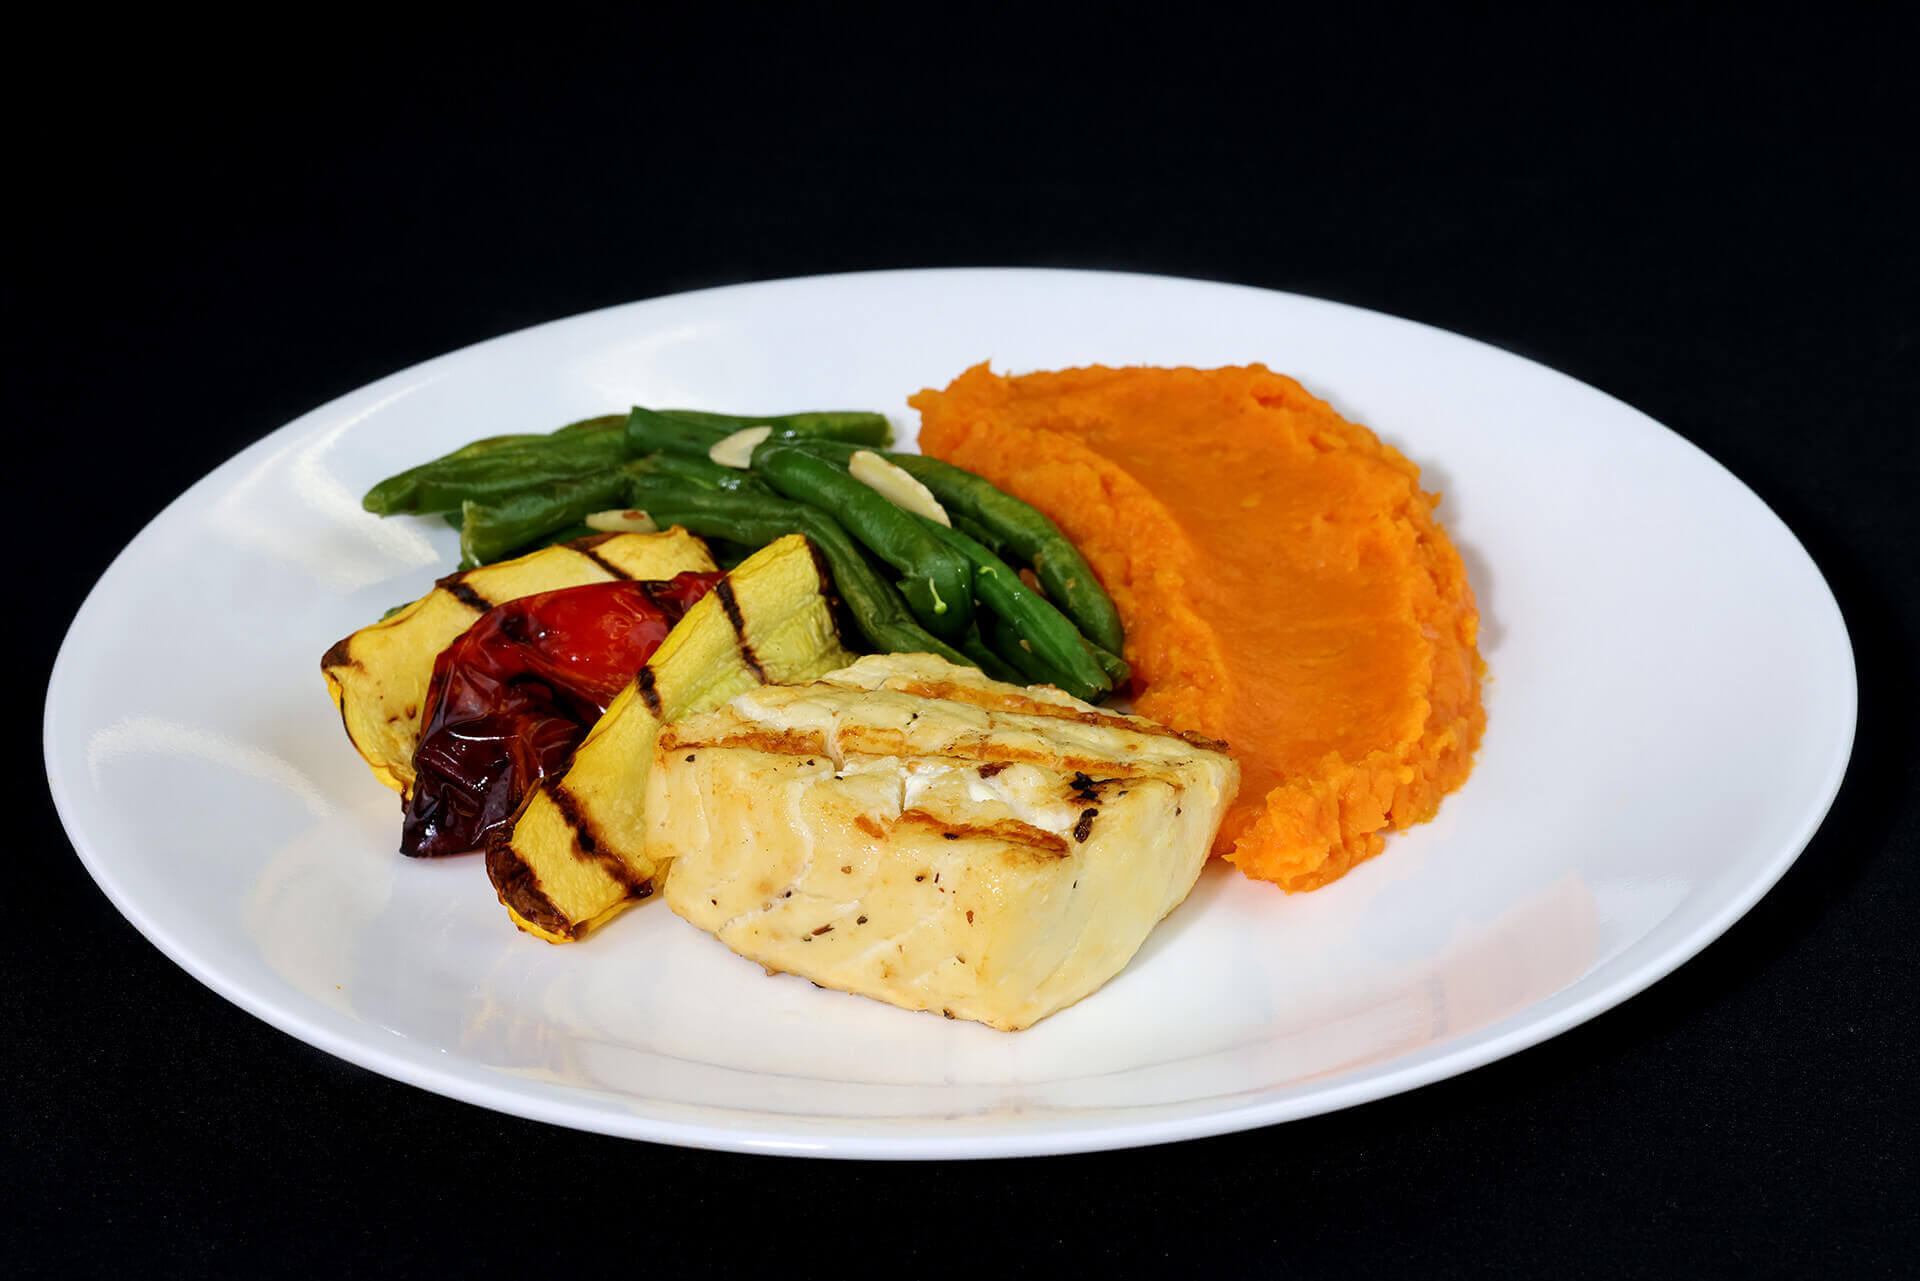 Paleo white fish and yam mash, roasted bell peppers, and green beans, topped with almonds.